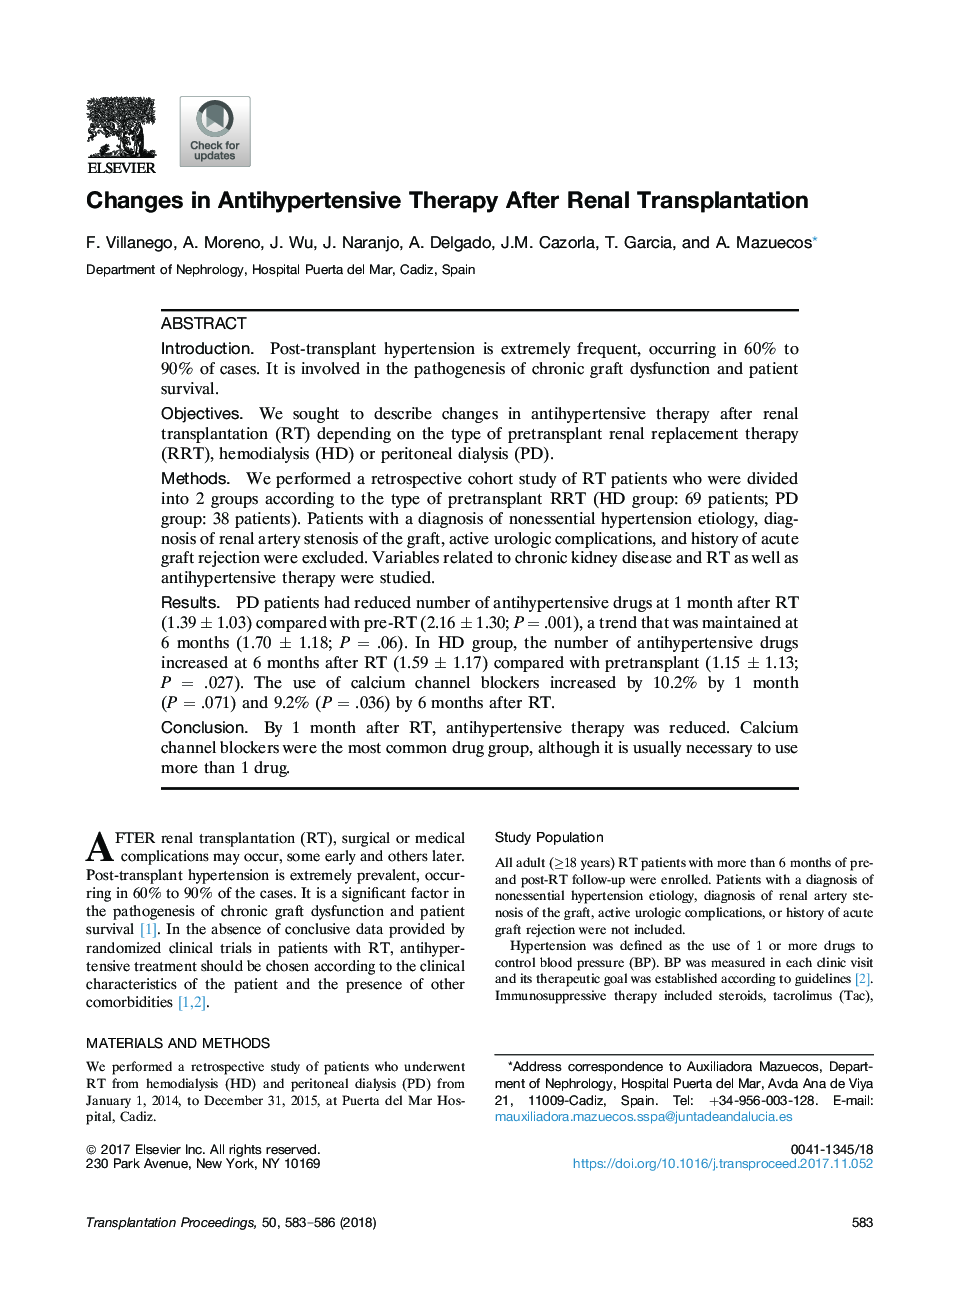 Changes in Antihypertensive Therapy After Renal Transplantation